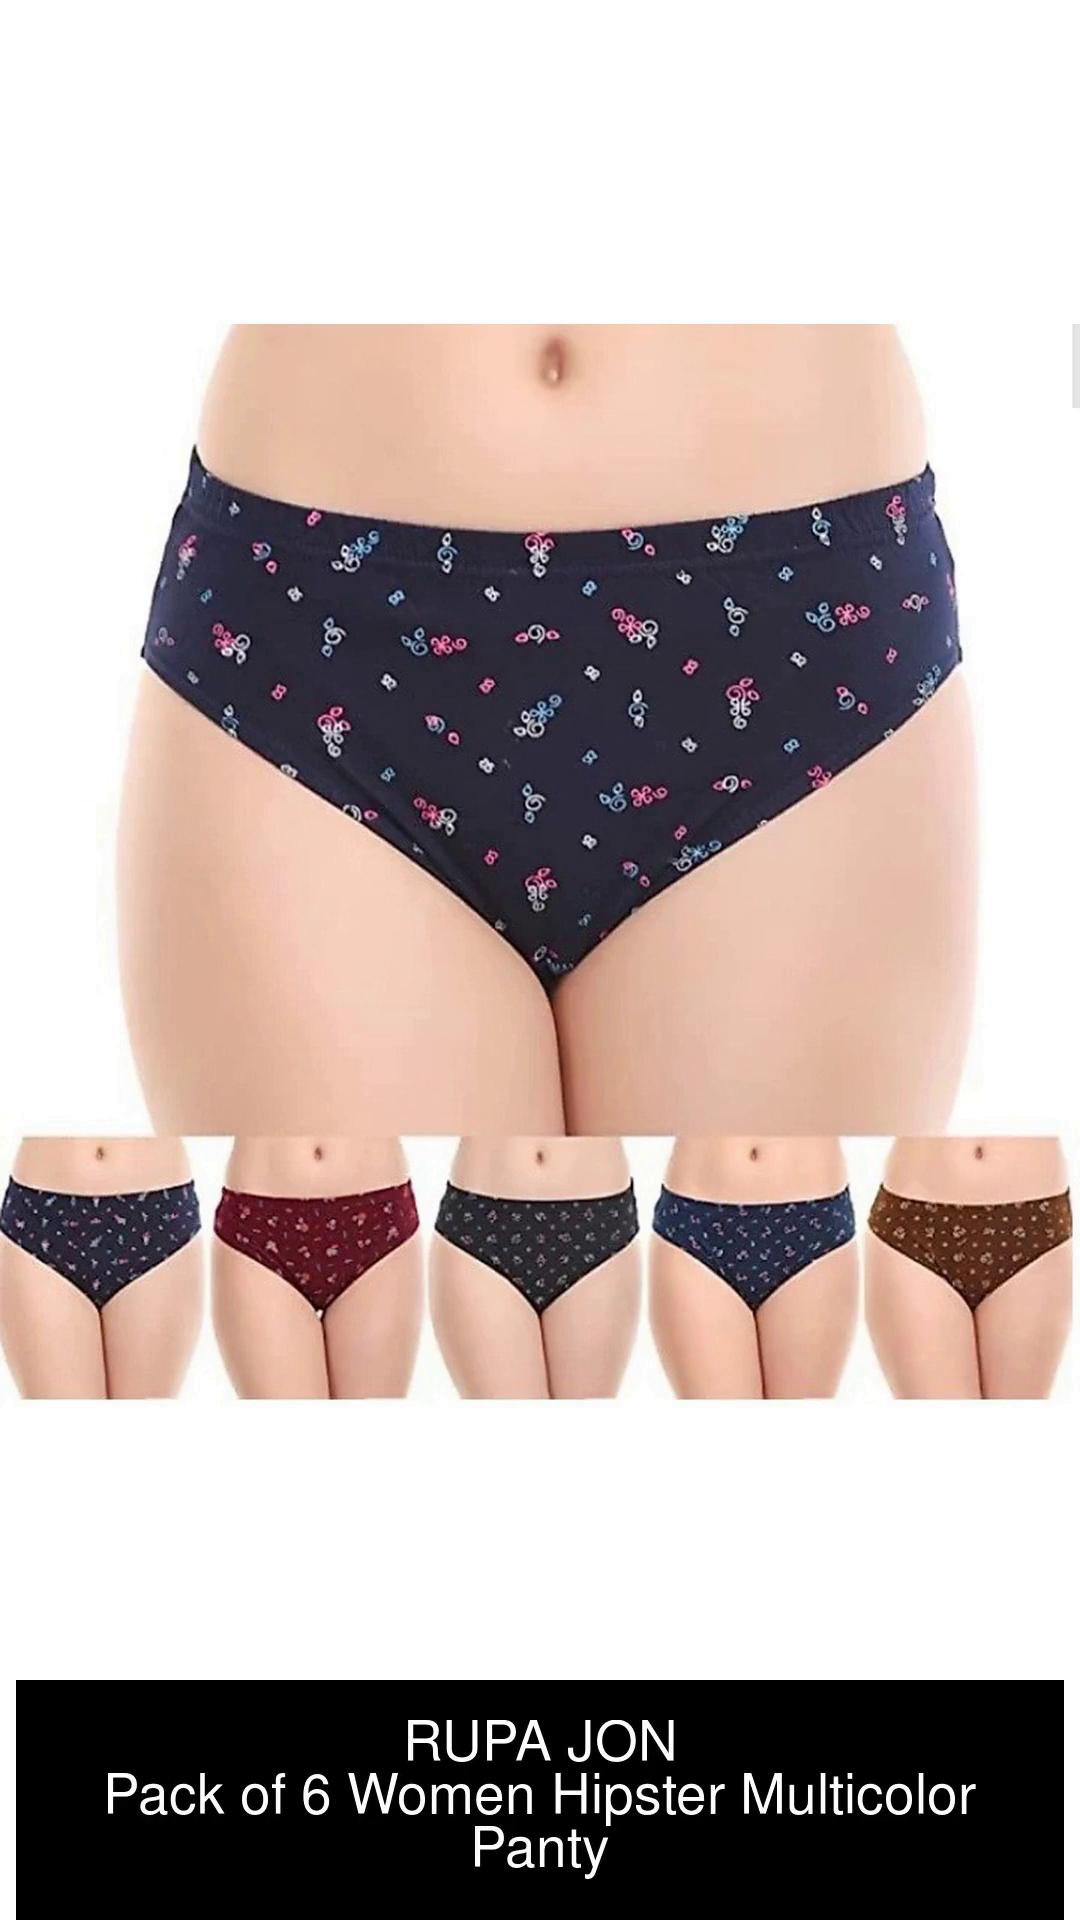 Rupa Jon Cotton Printed Hipsters Panty for Women